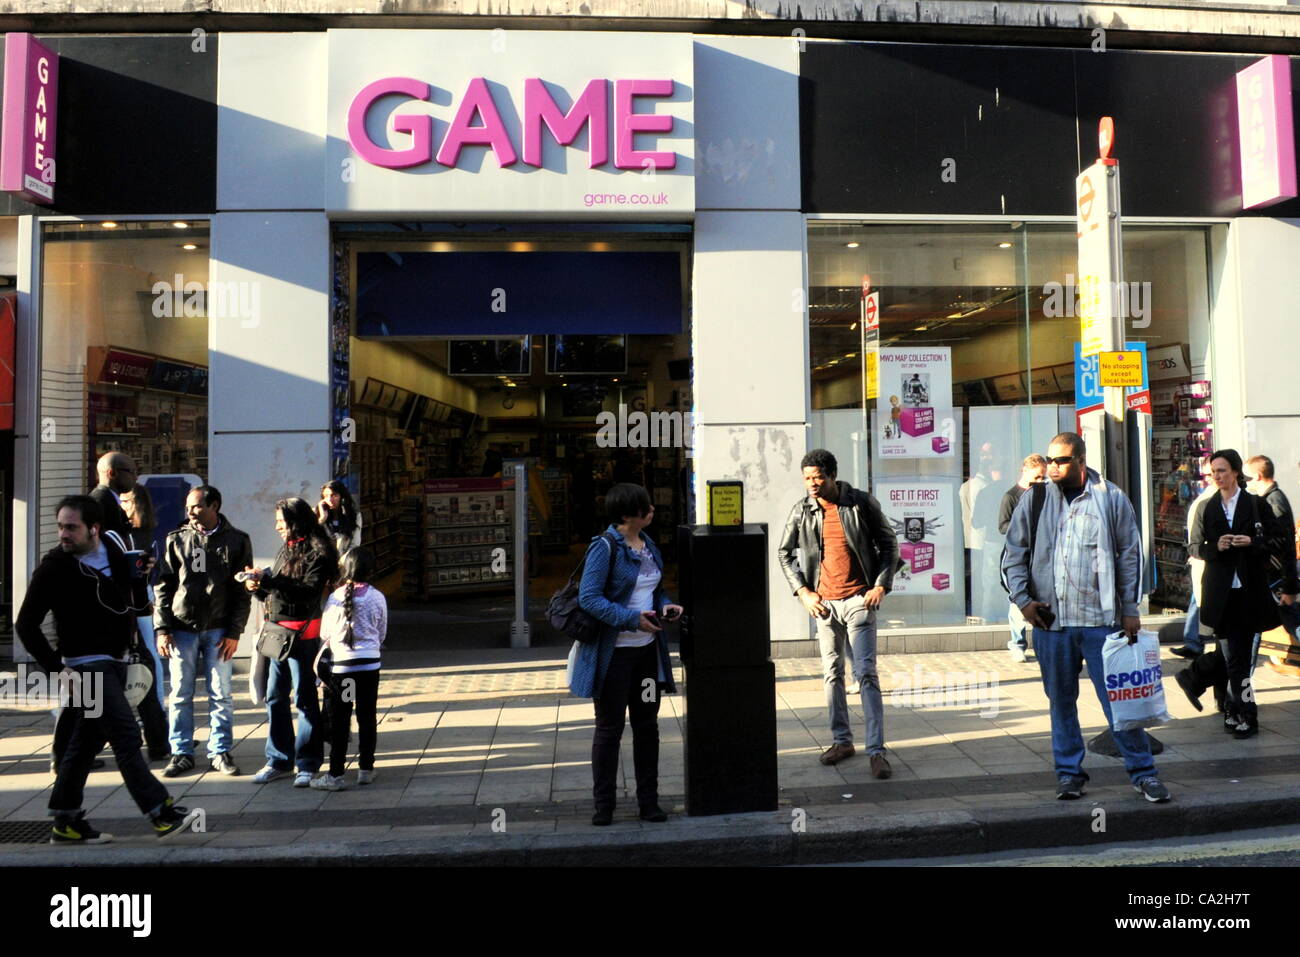 London Uk 26 03 12 The Game Store On Oxford Street Still Open As Administrators At Game Group Today Announced That They Will Close Nearly Half Of Their 609 Stores In The Uk Leaving